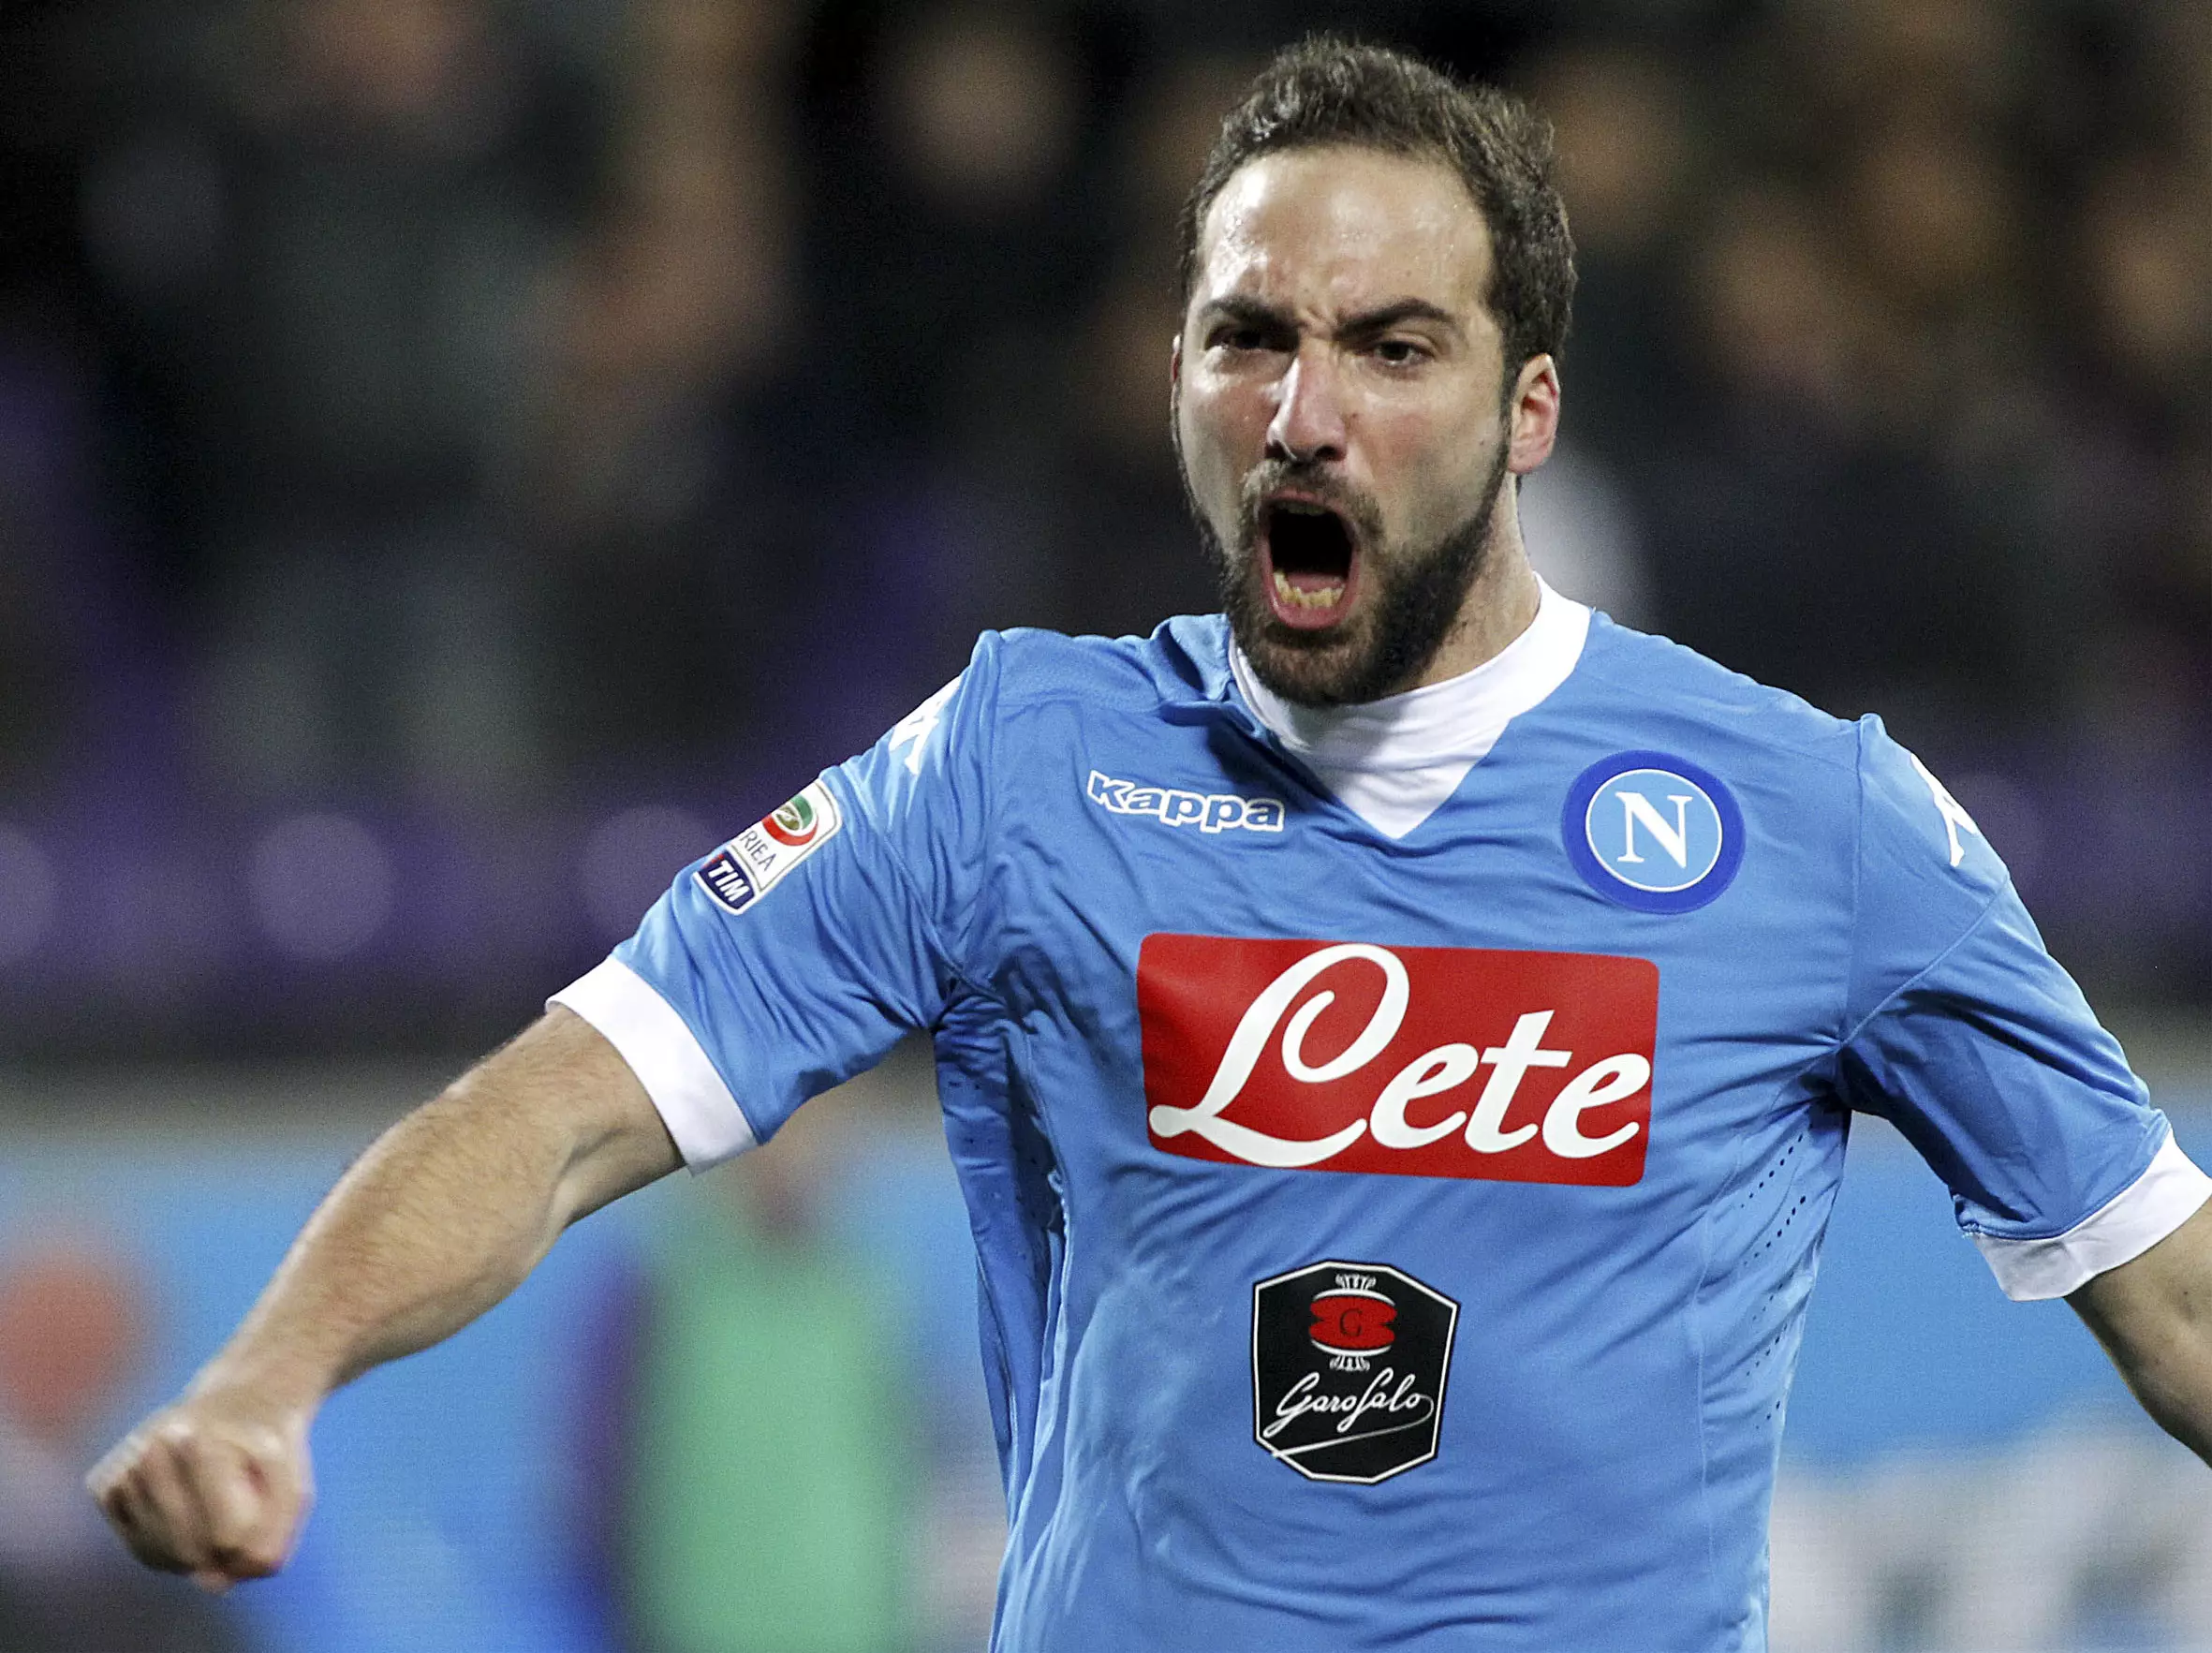 Naples Pizzeria Makes Amazing Gonzalo Higuain Offer To Customers